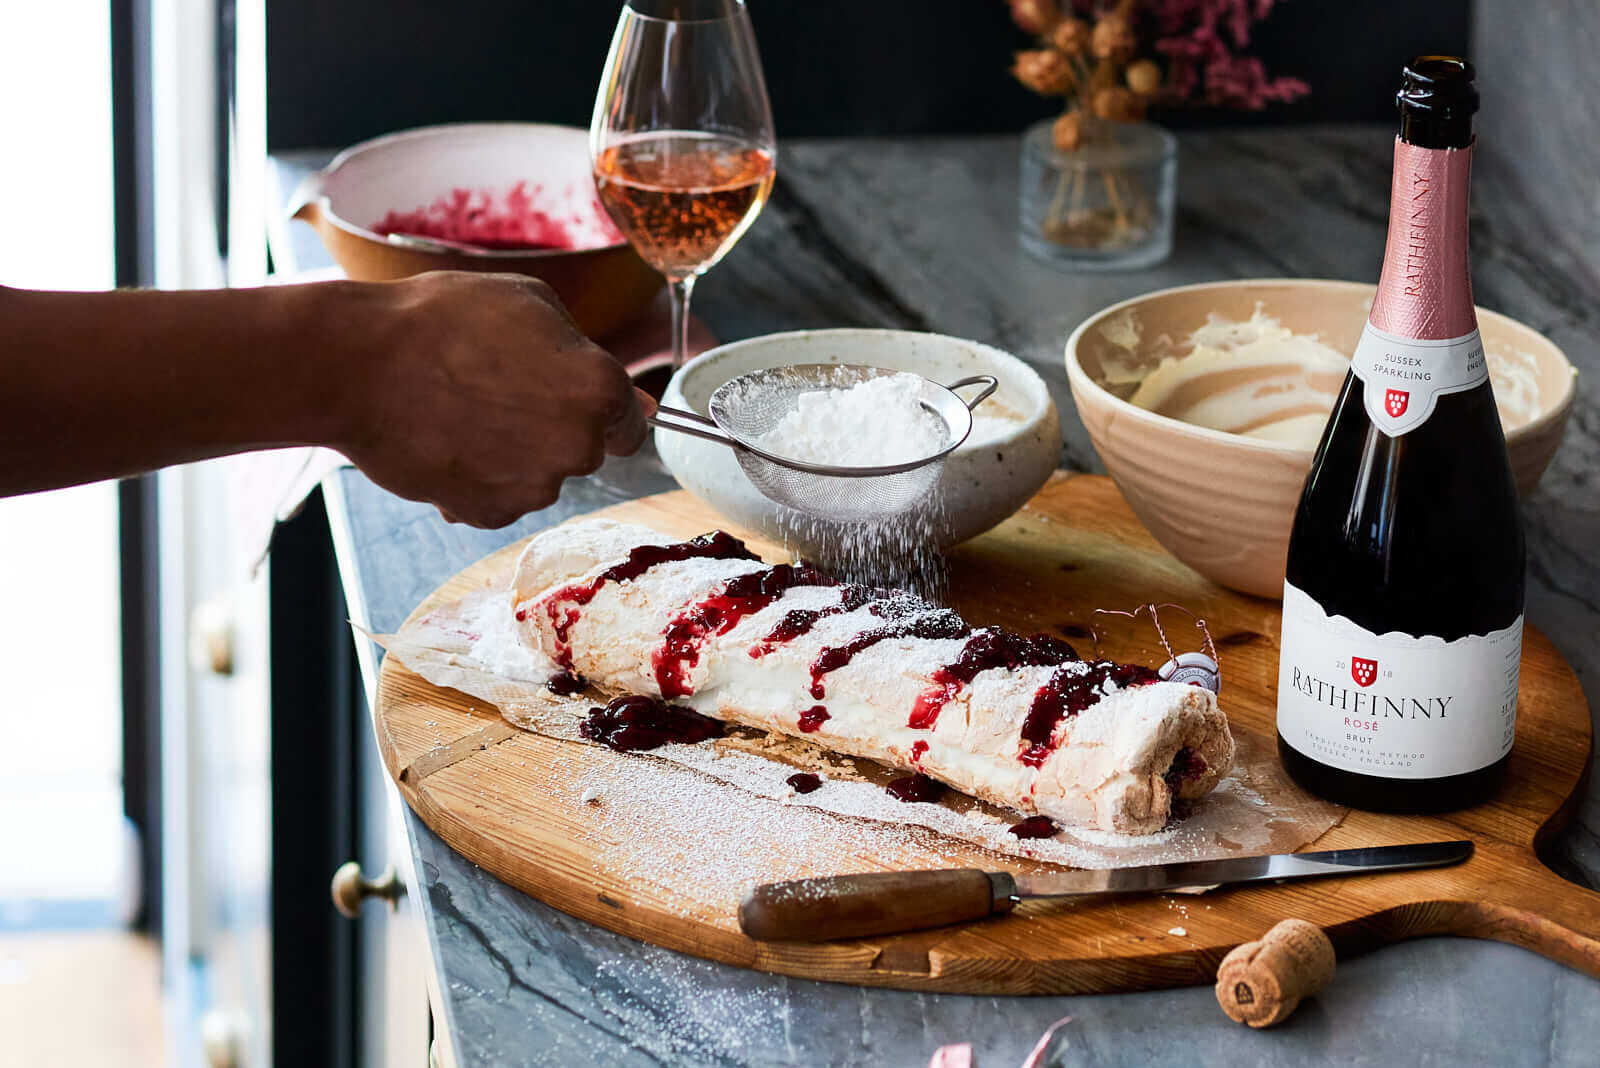 Rathfinny Sussex Sparkling 2018 Rose with Winter Roulade